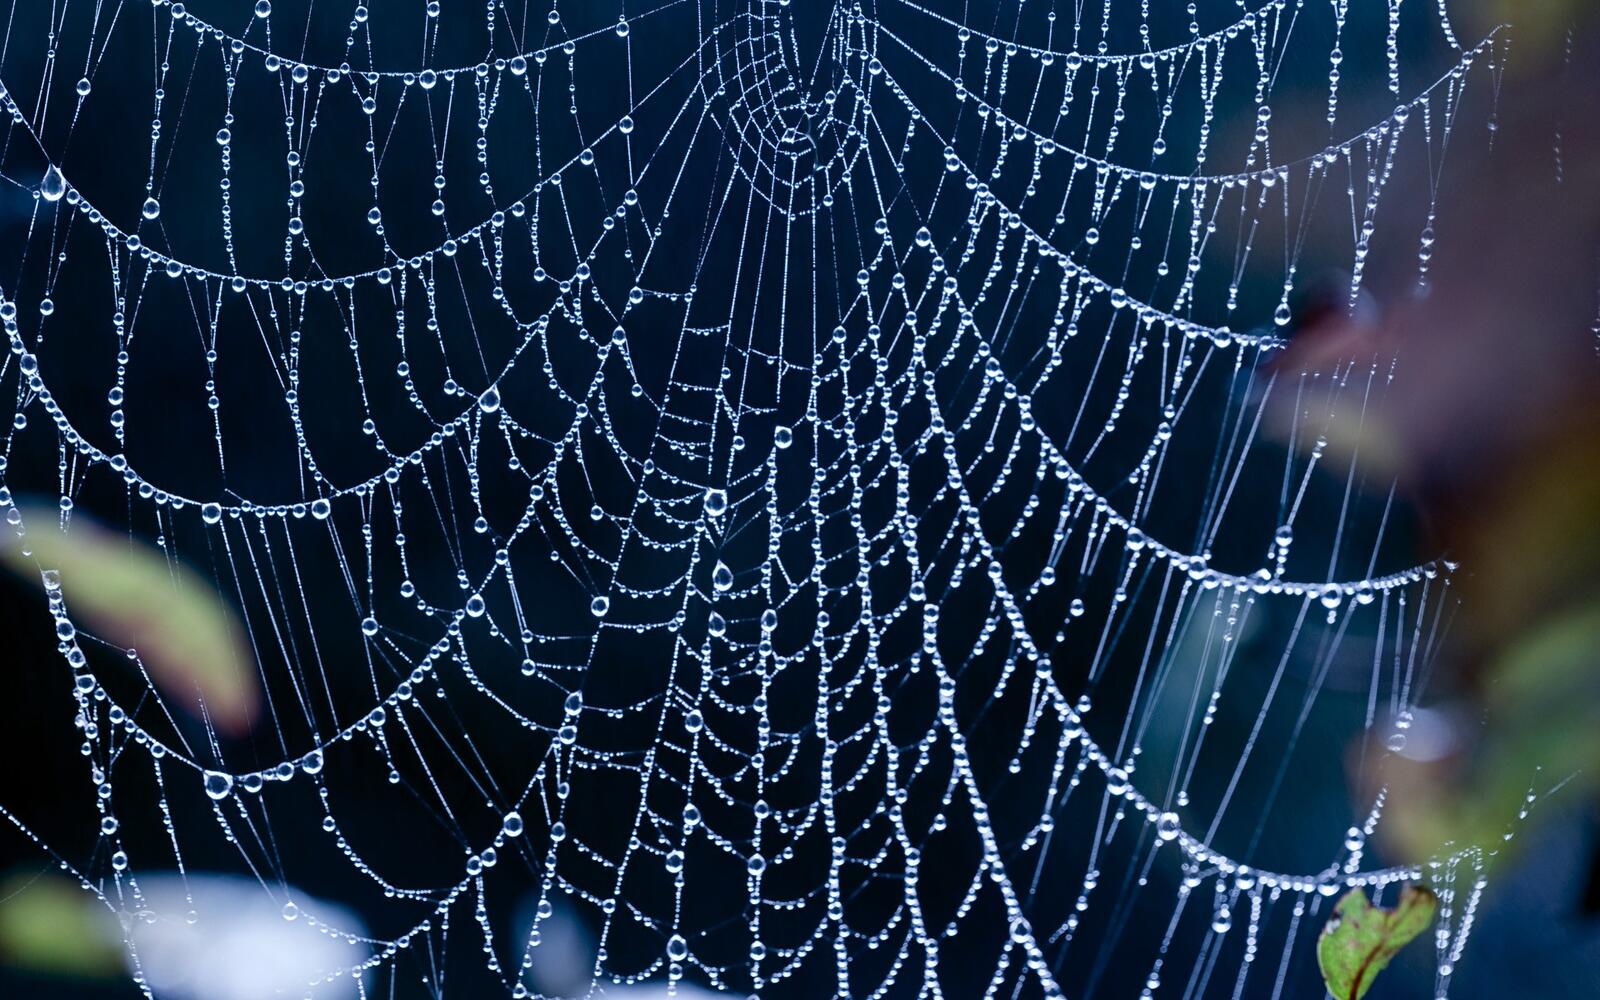 Free photo Spider web with water droplets